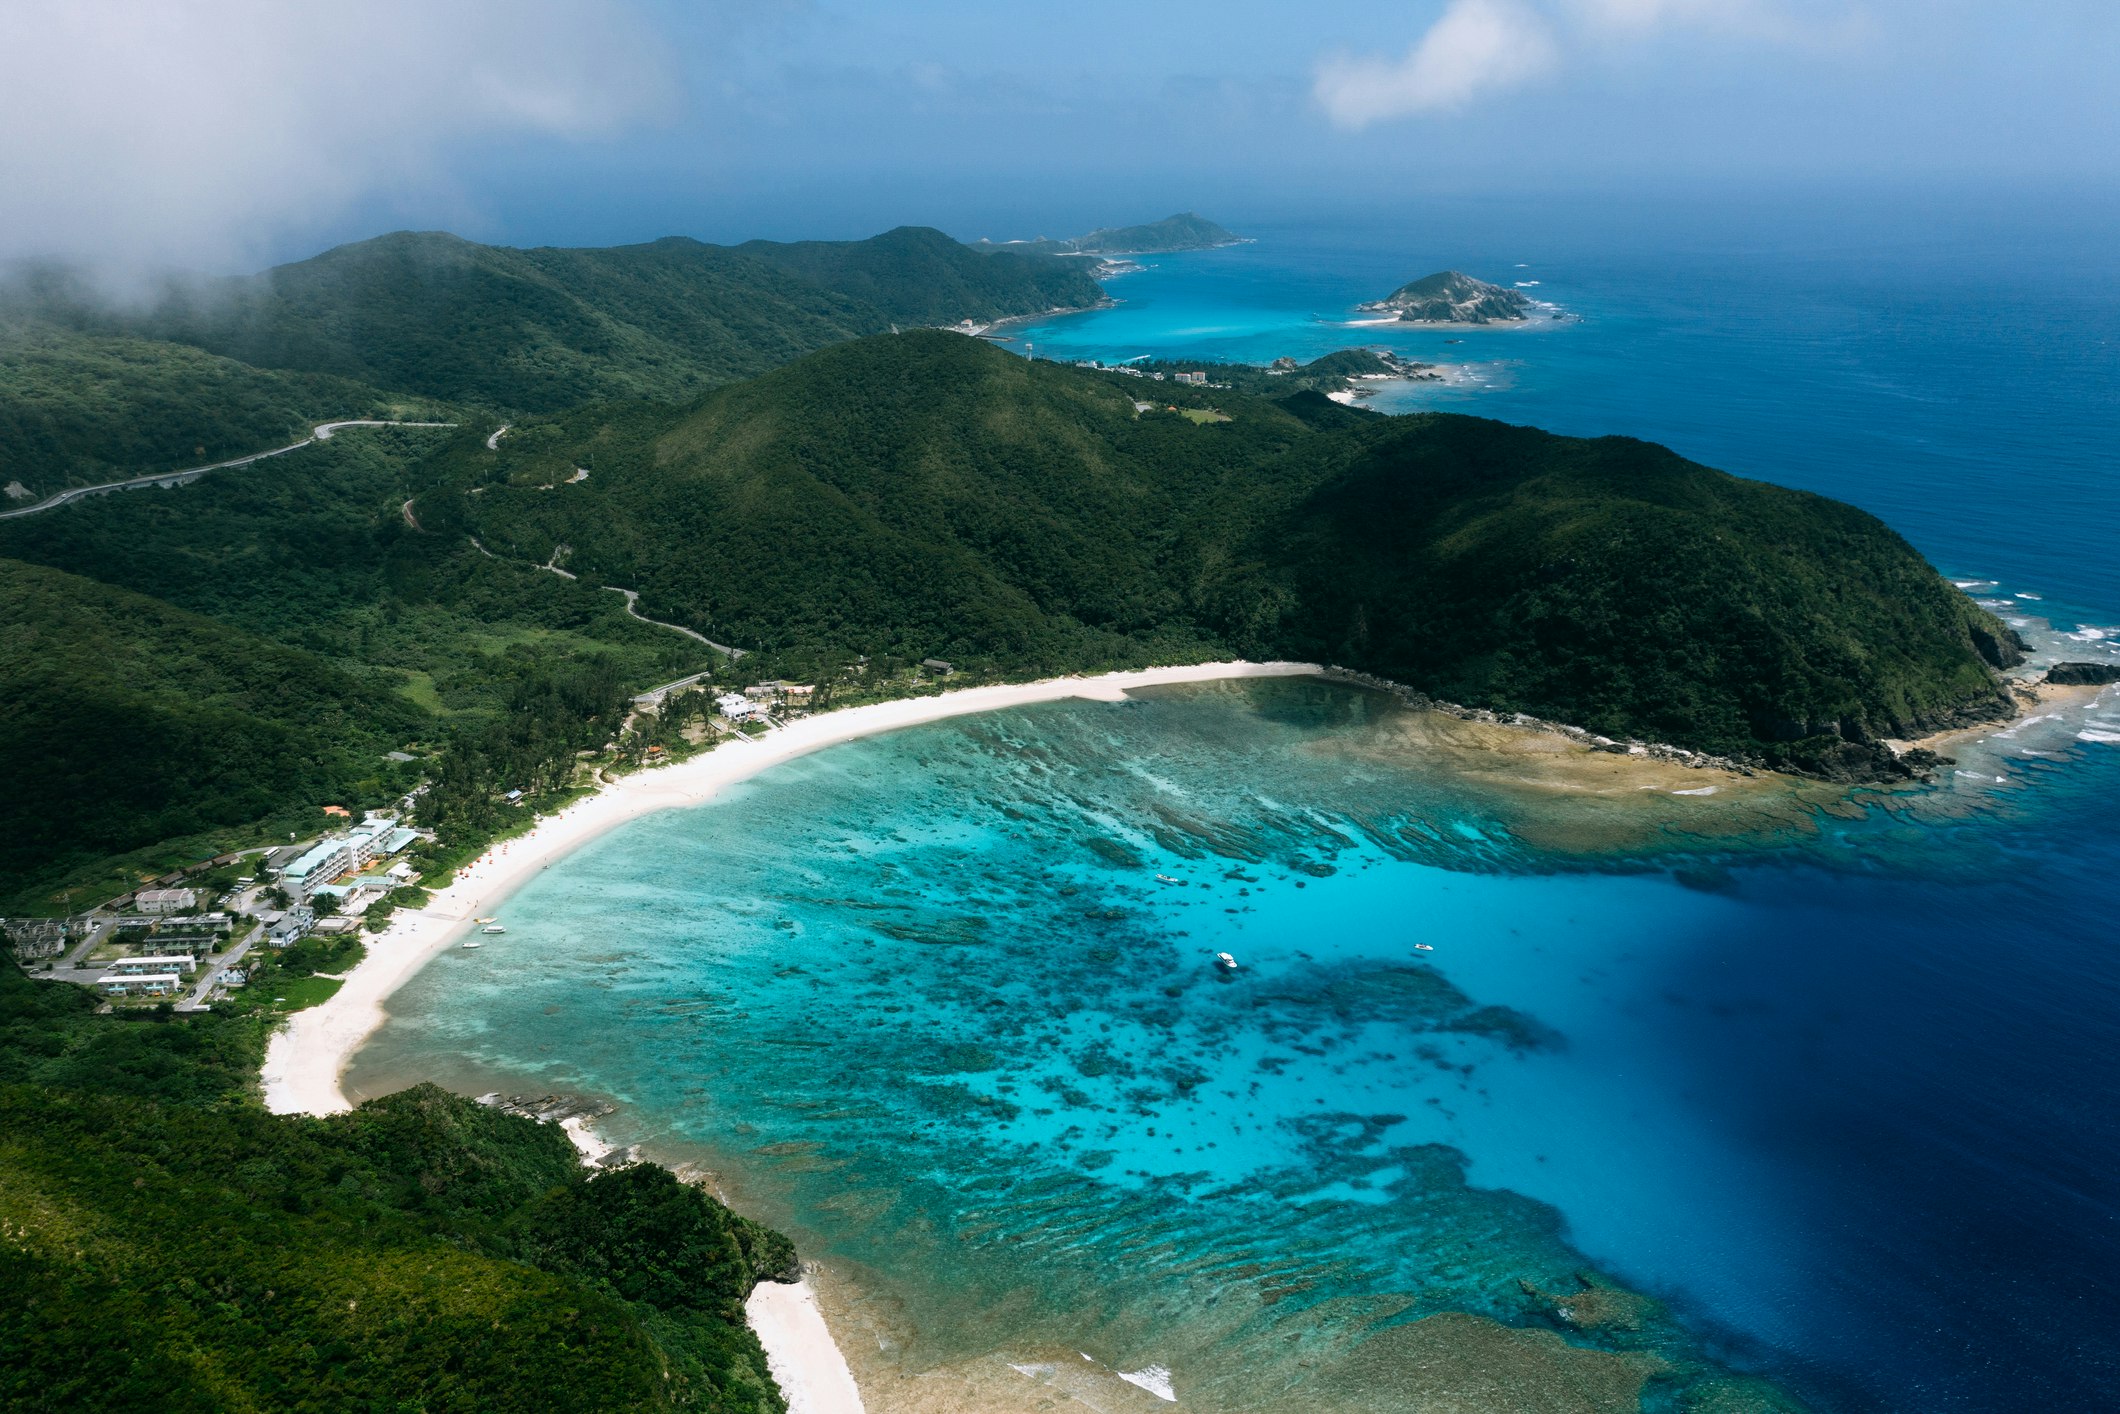 The brilliant blue and teal waters of Keramashoto National Park extend out from a crescent shaped beach, with a thin strip of white sand pressed against the green and black hills of Tokashiki island 